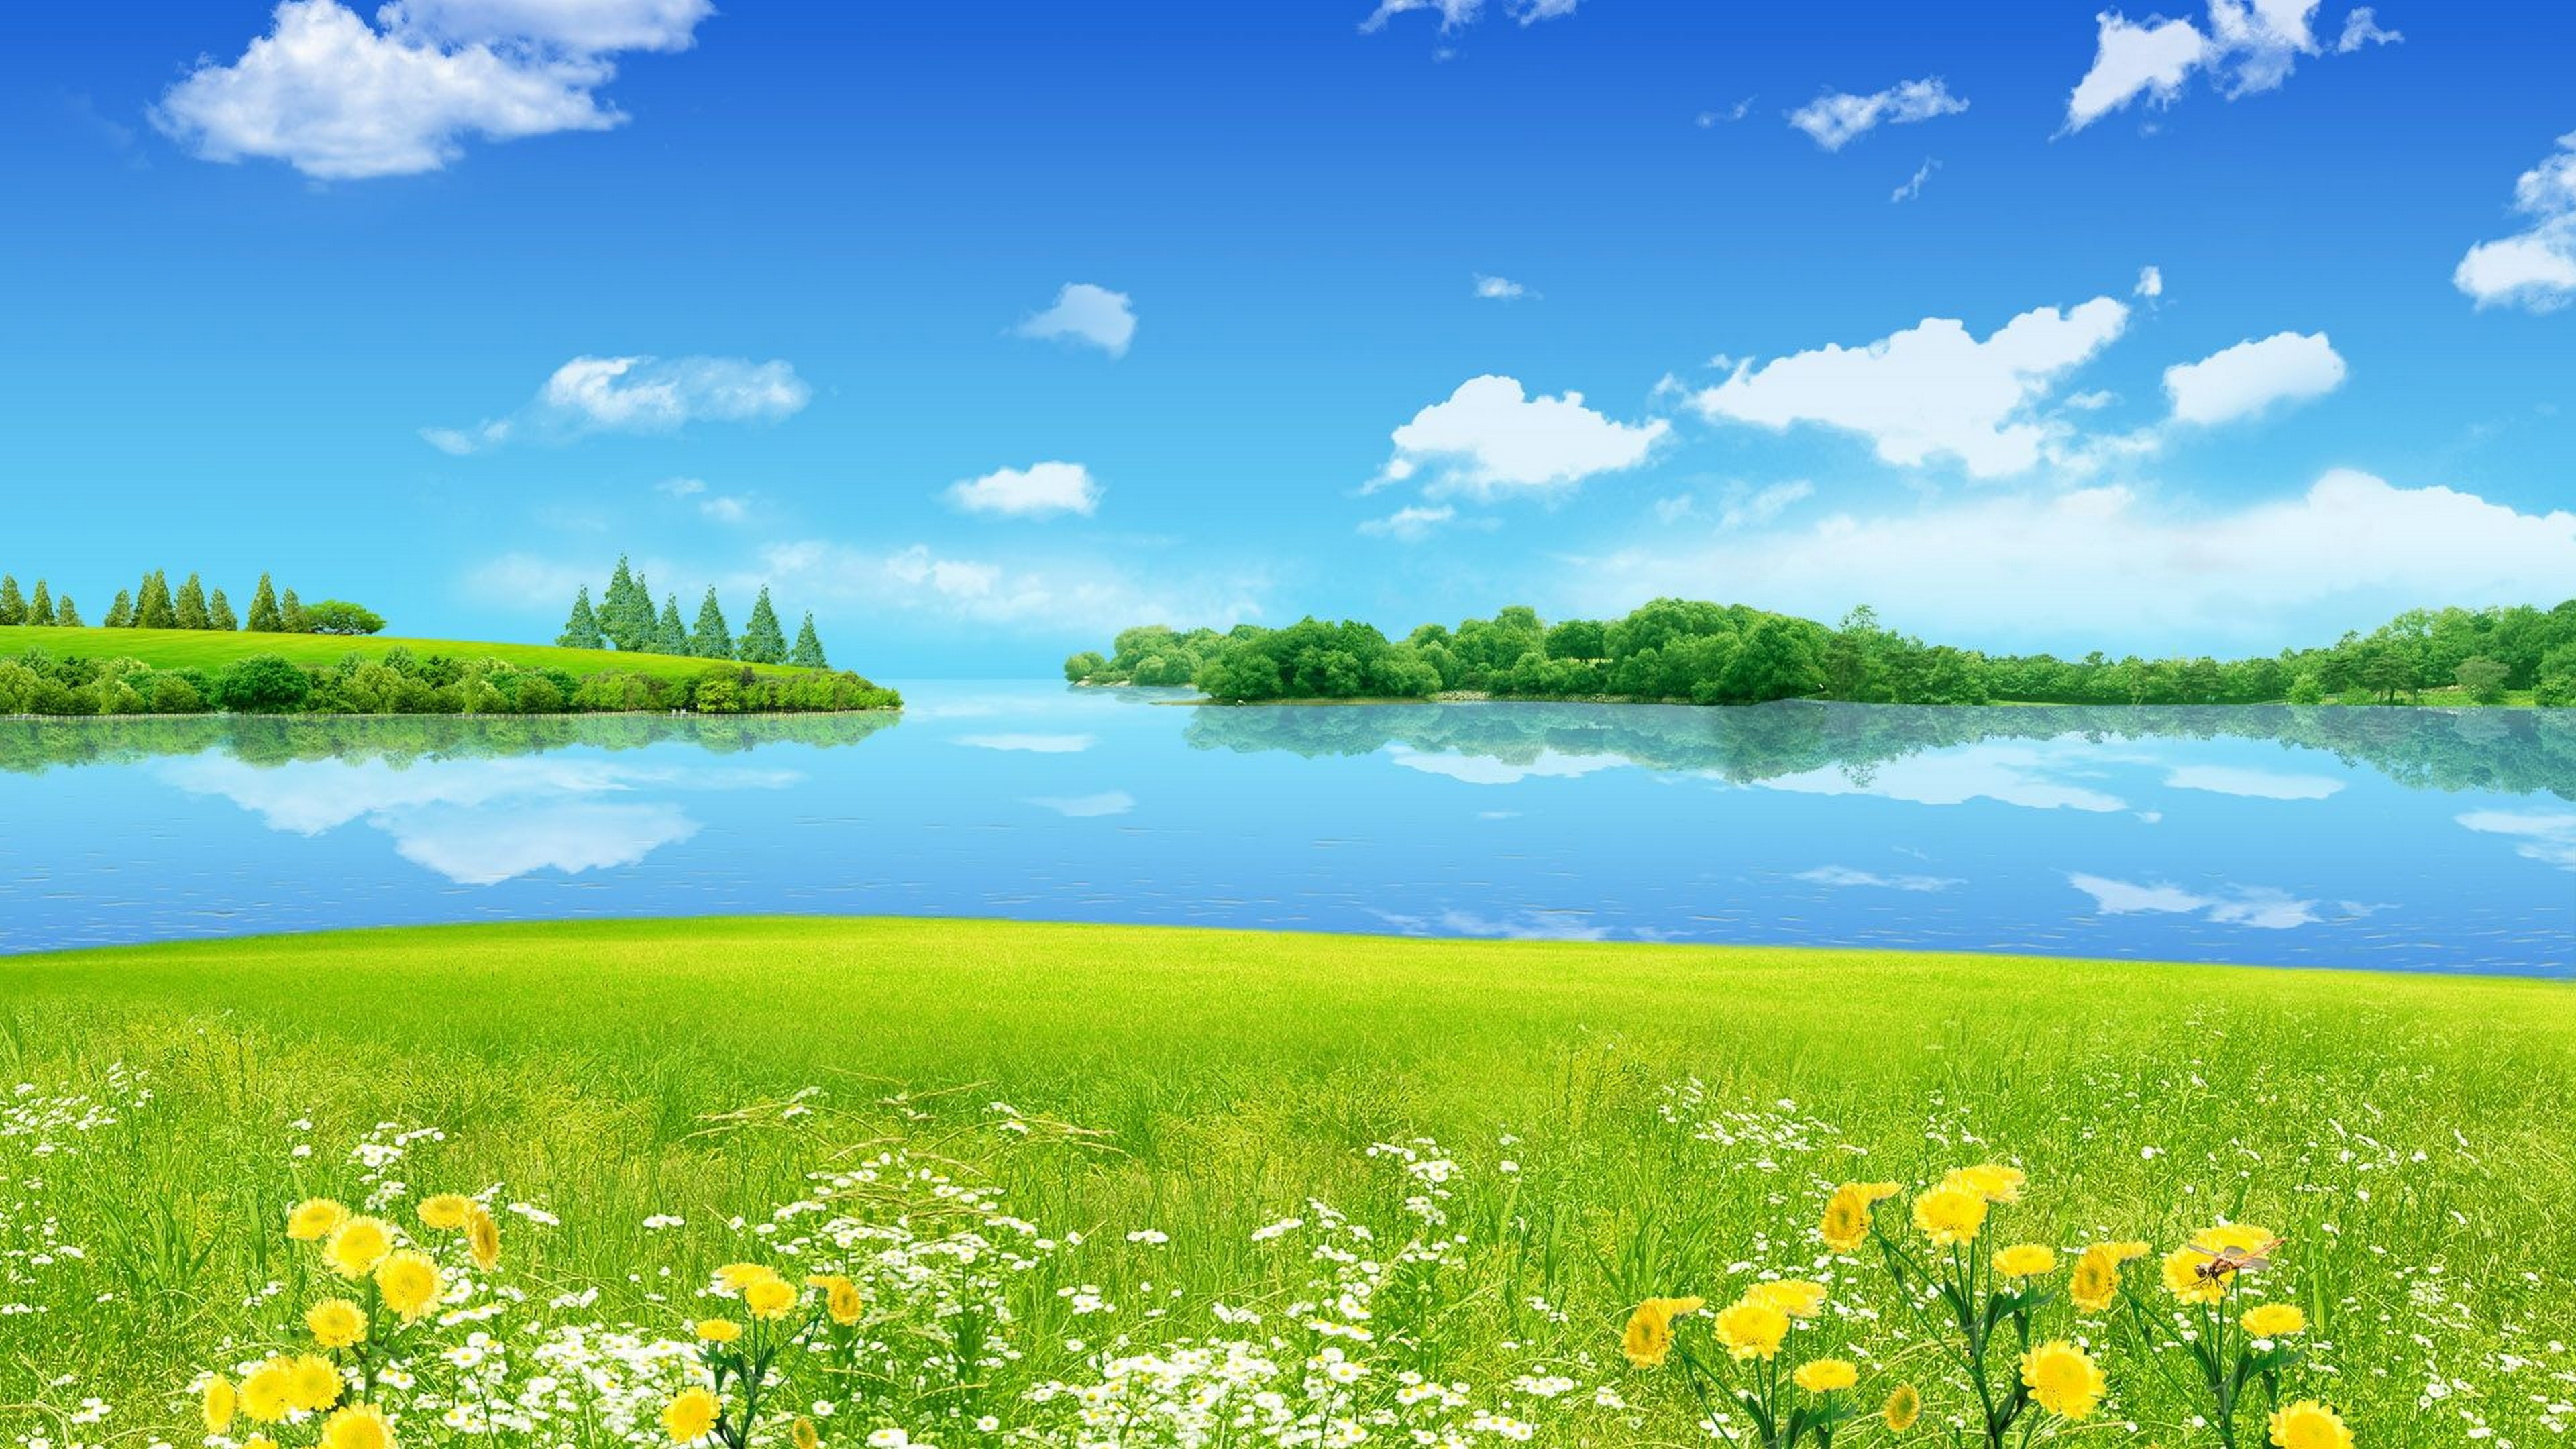 Summer Landscape Meadow With Green Grass Wild Flowers Blue Sky Reflection In Lake Desktop Hd Wallpaper For Mobile Phones Tablet And Pc Wallpapers13 Com